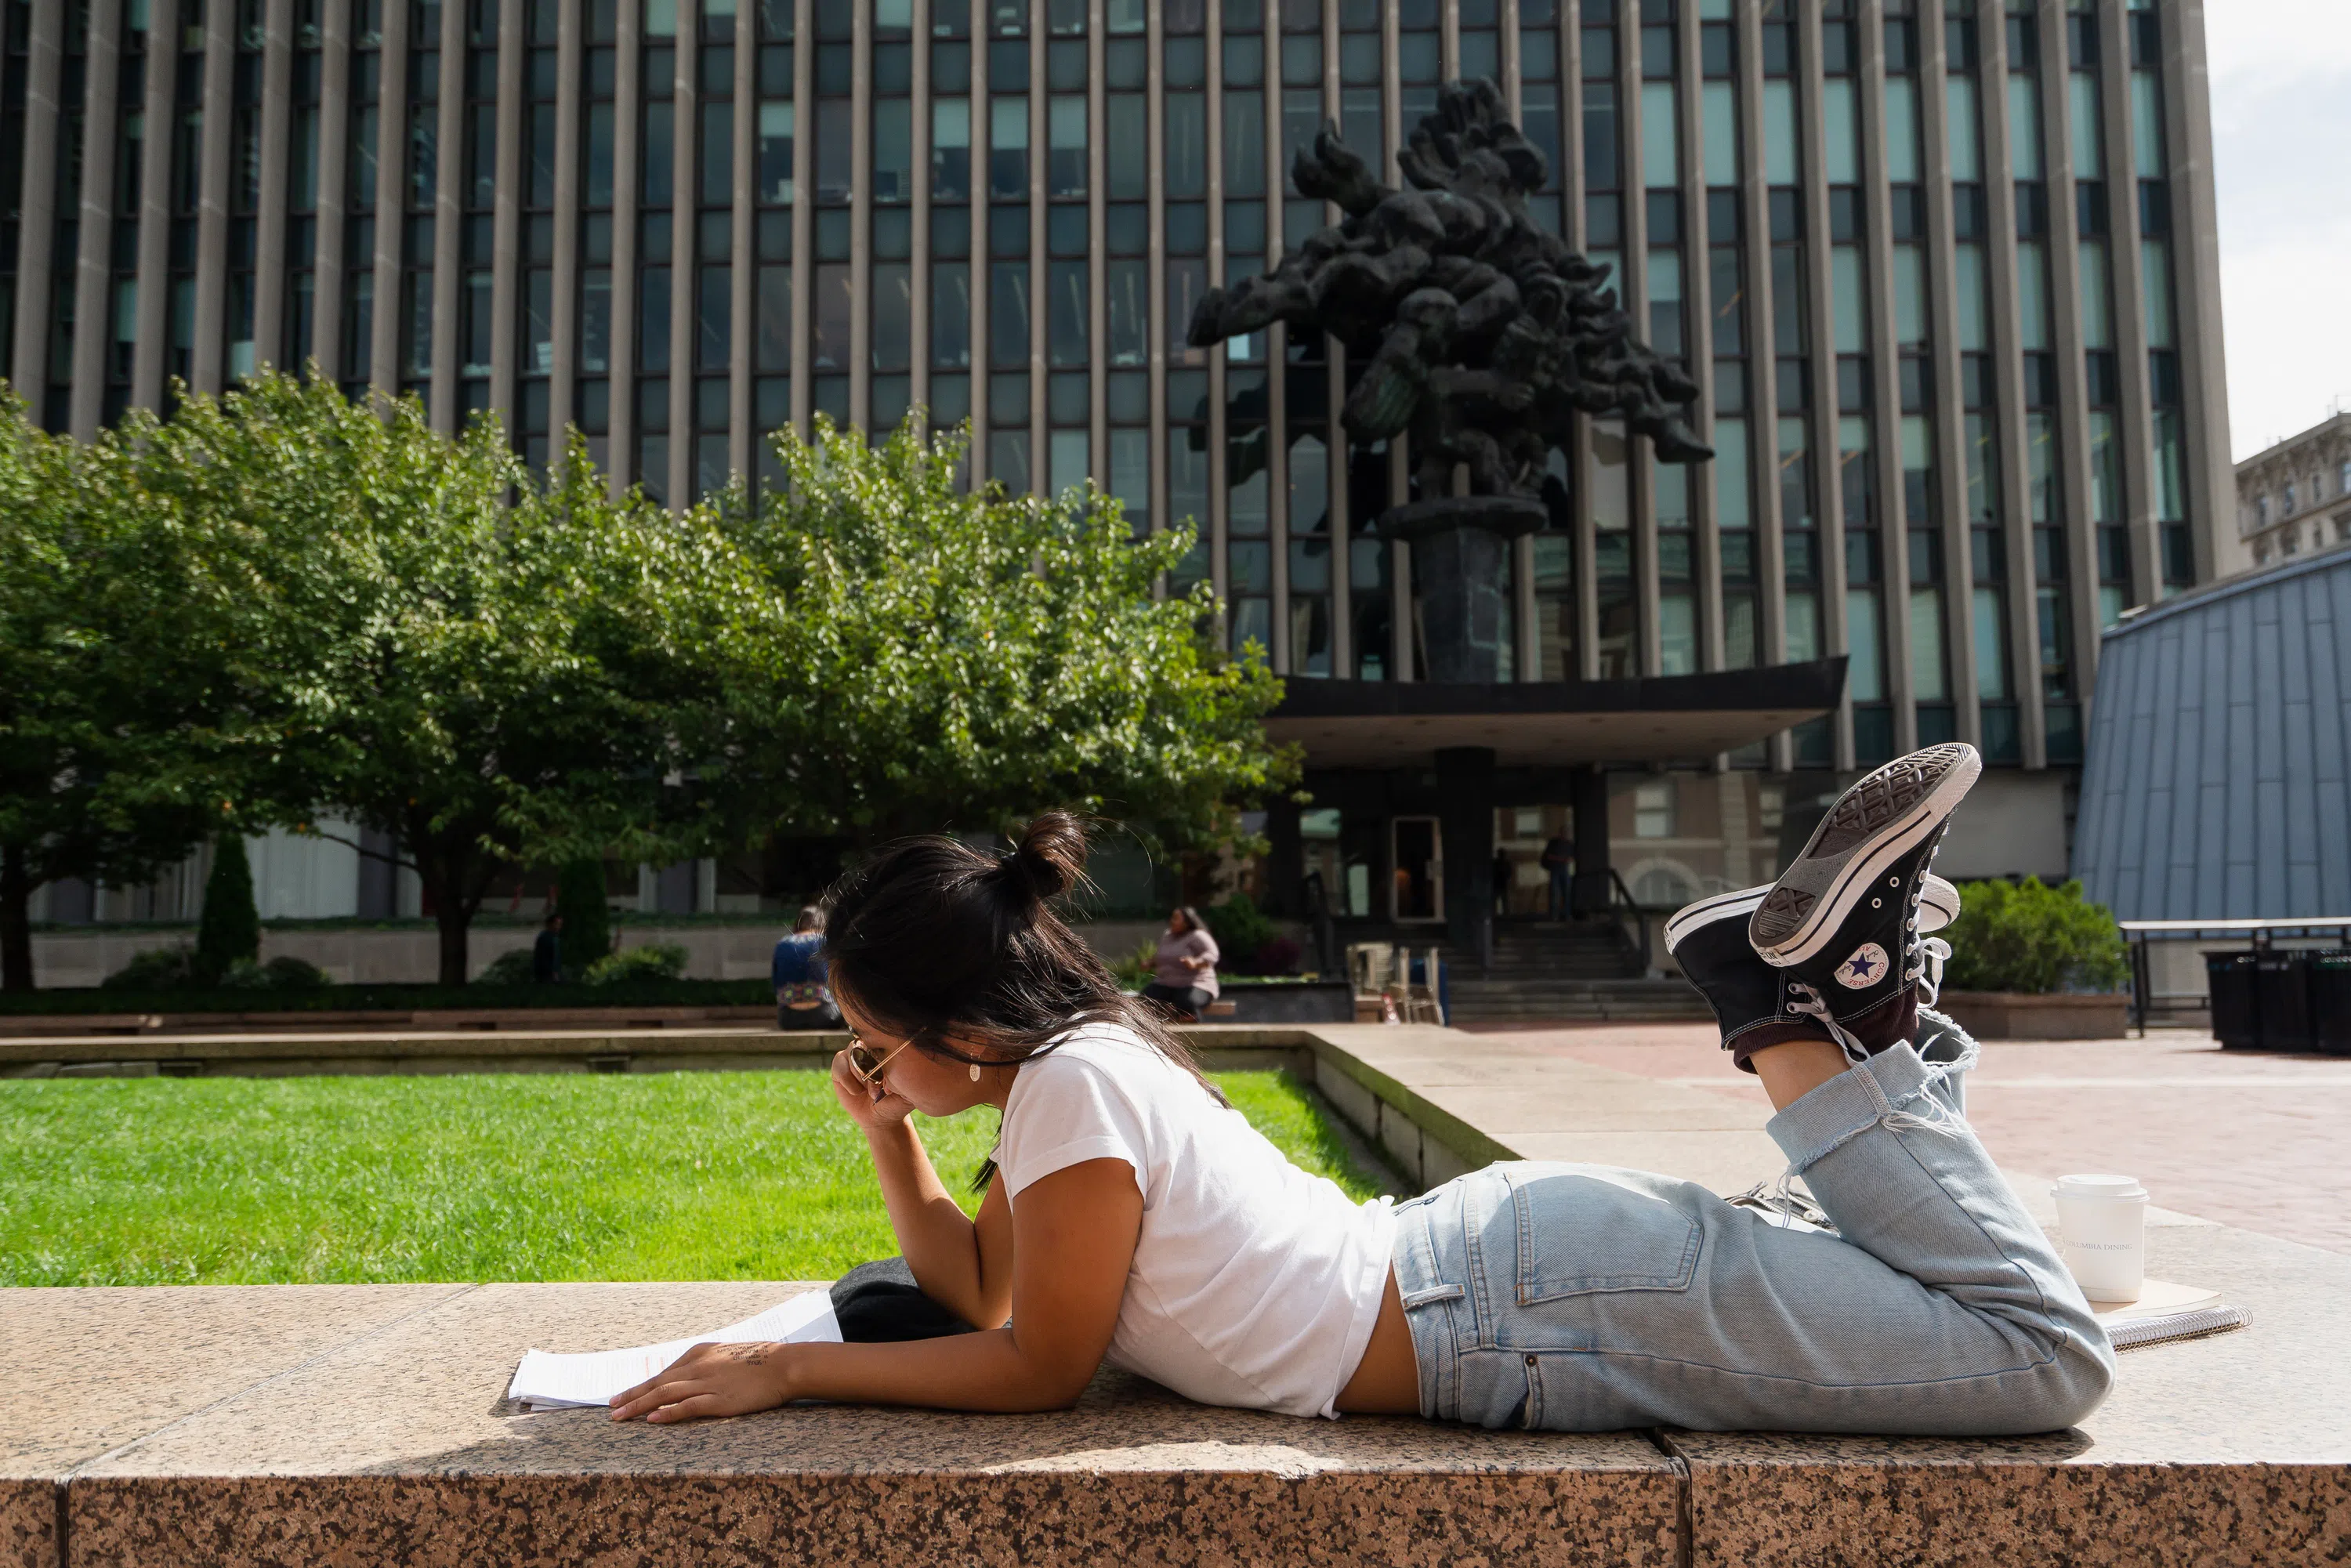 Student lounges while reading a book on a stone ledge. Behind her there are trees, sculpture art, and a glass building.